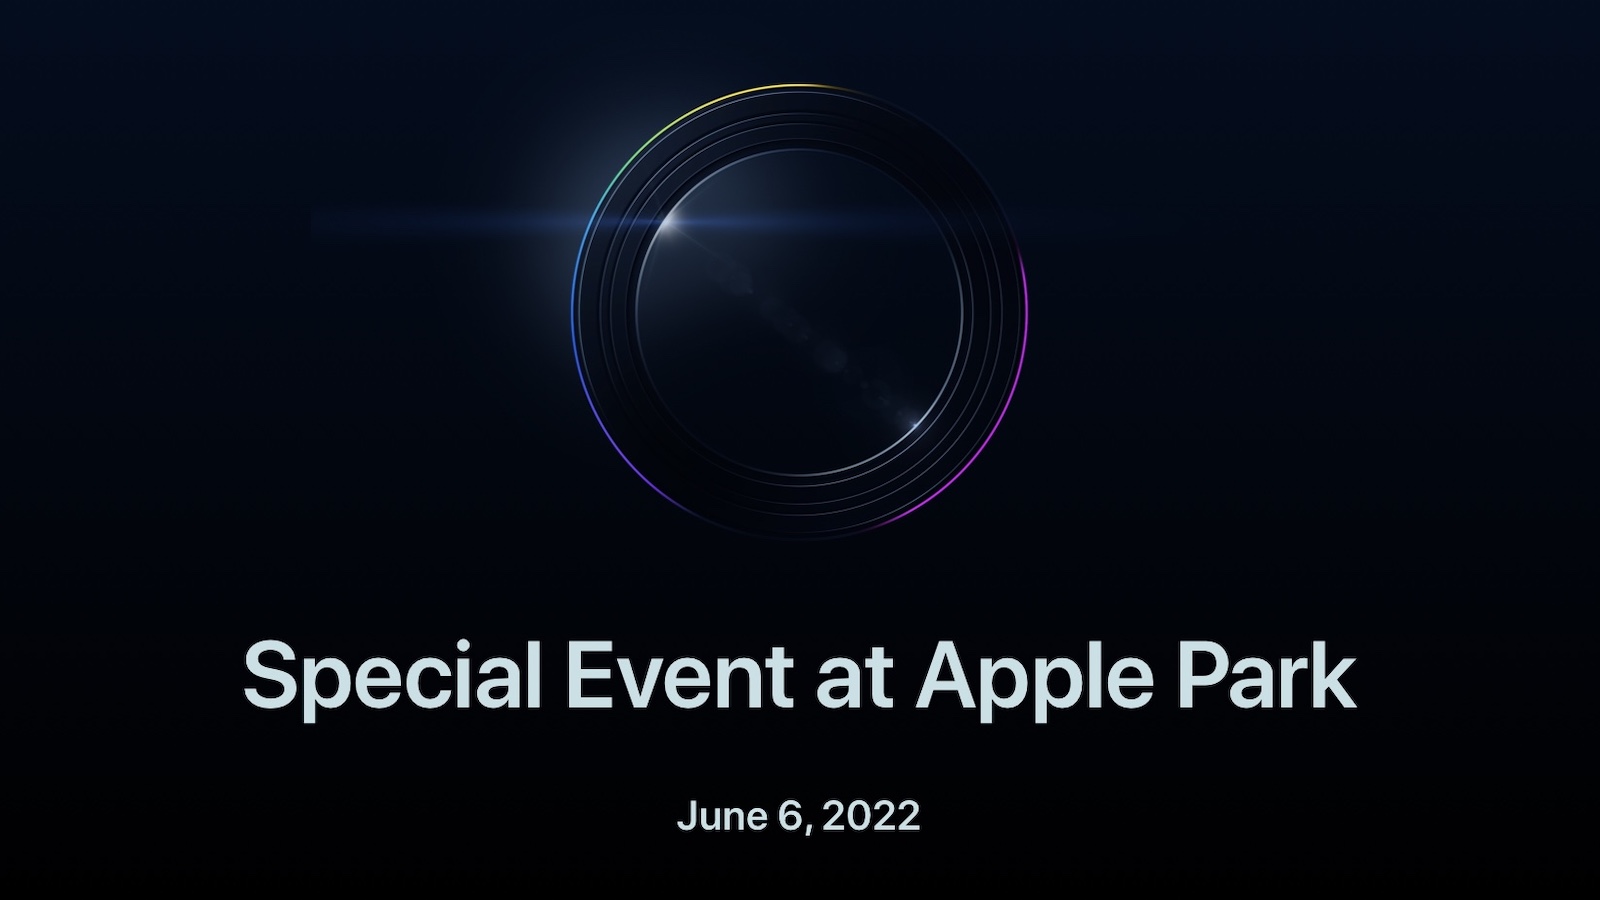 Apple Tightens COVID Prevention Rules for Developers Attending Apple Park WWDC Viewing Event